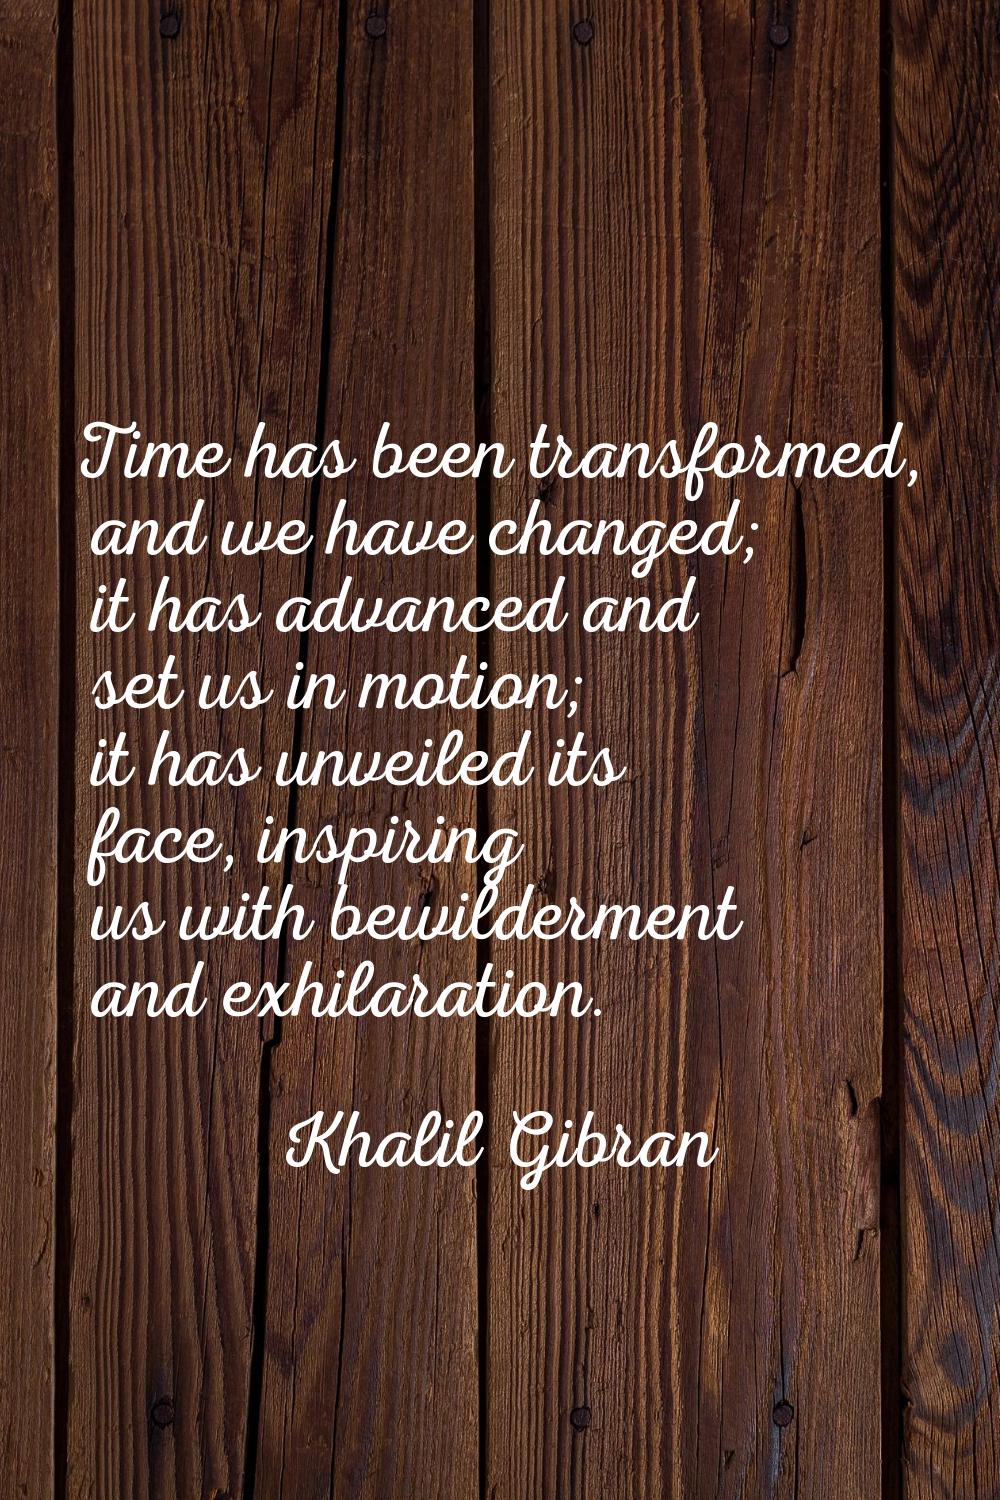 Time has been transformed, and we have changed; it has advanced and set us in motion; it has unveil